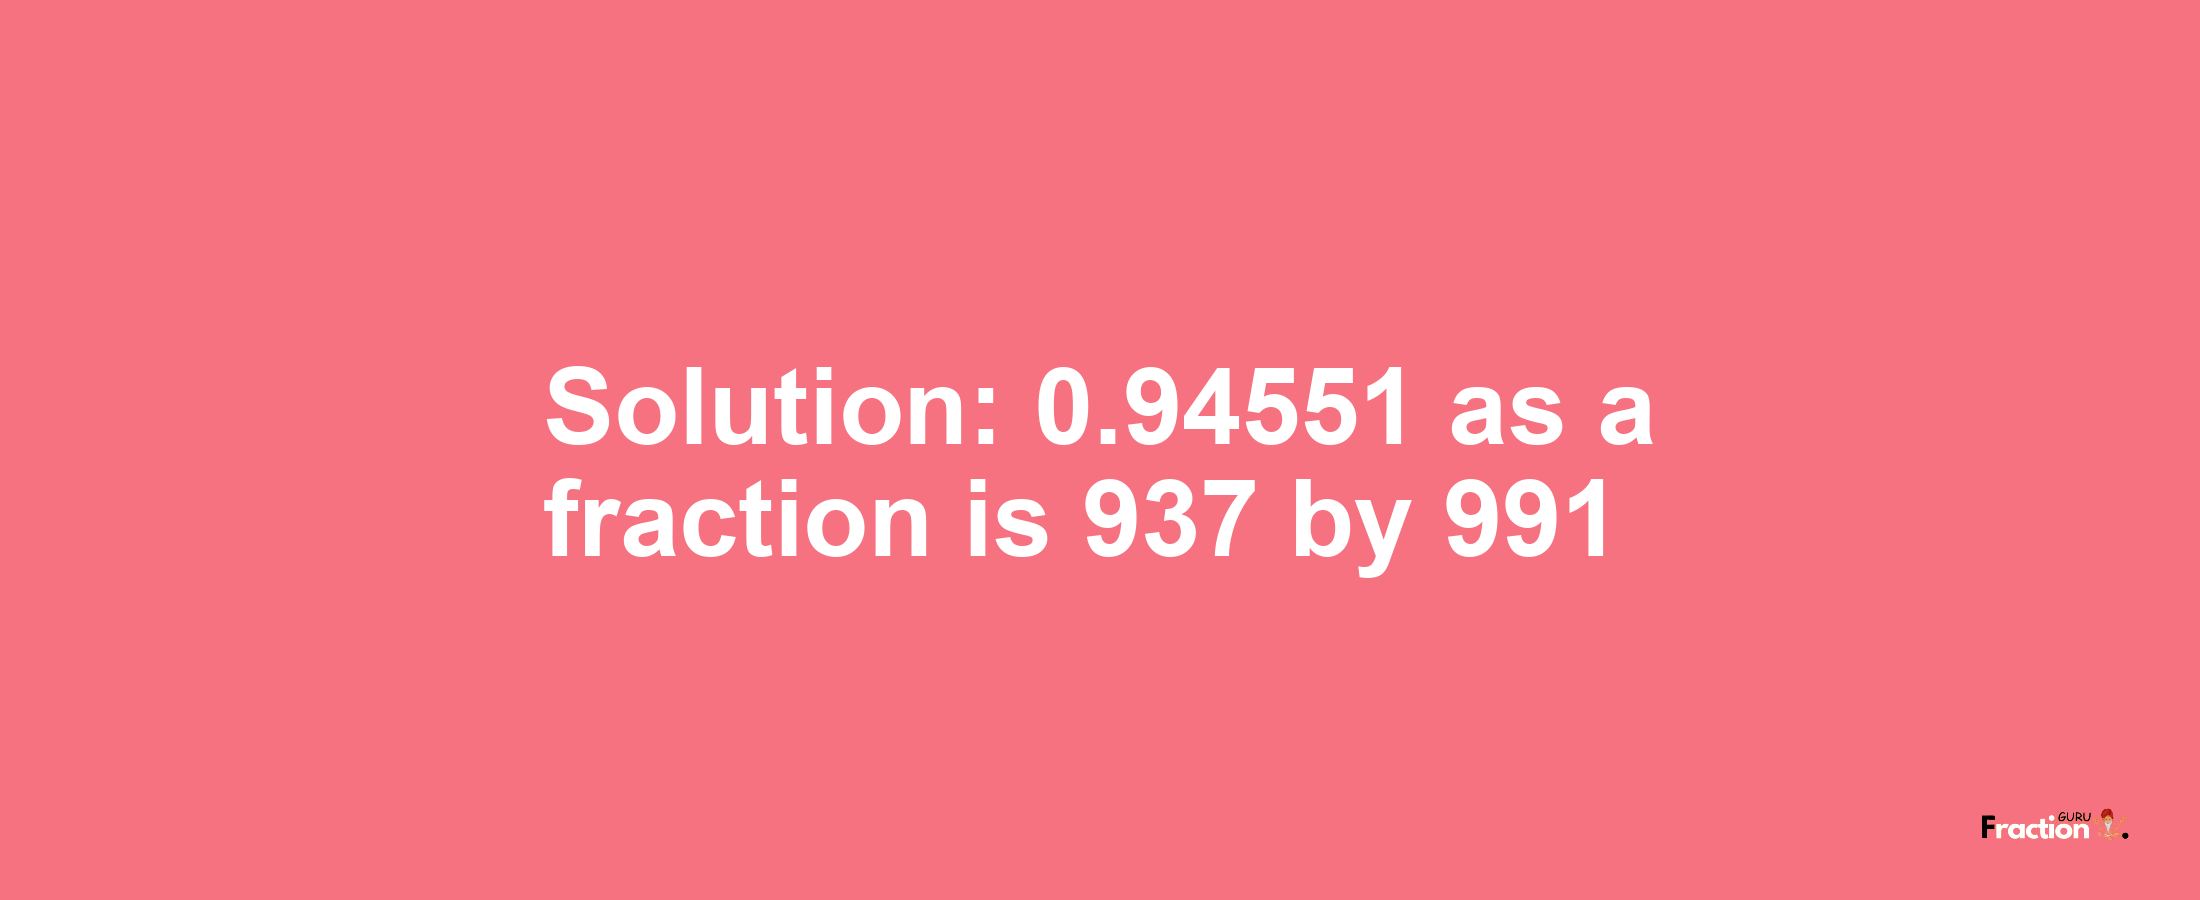 Solution:0.94551 as a fraction is 937/991